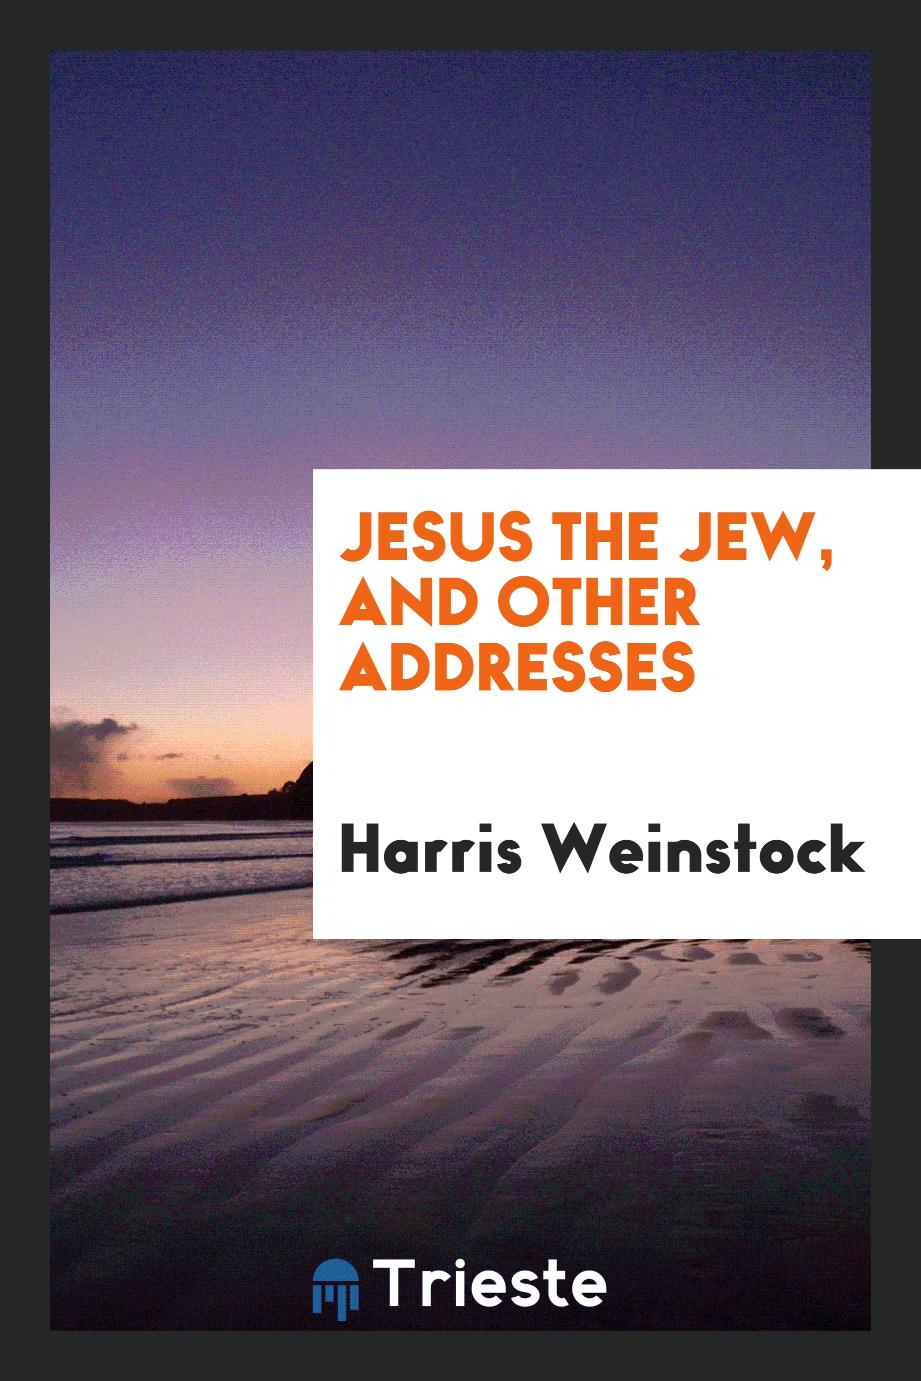 Jesus the Jew, and other addresses